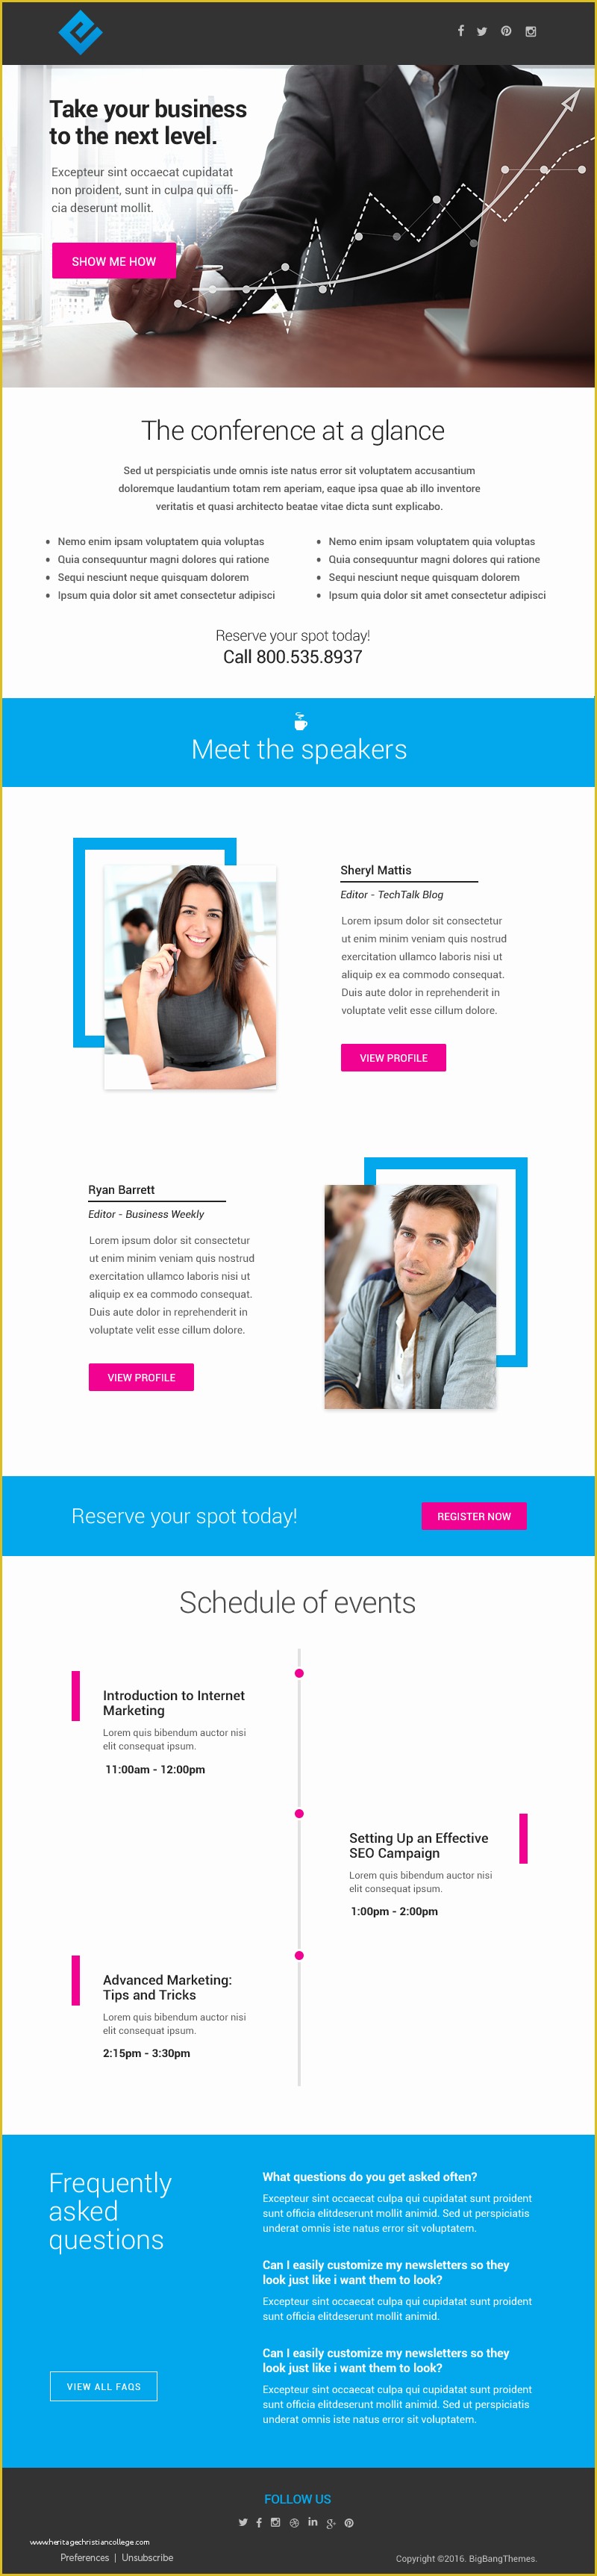 Free Email Template Builder Drag and Drop Of Emailer Drag & Drop Email Template Builder Access by